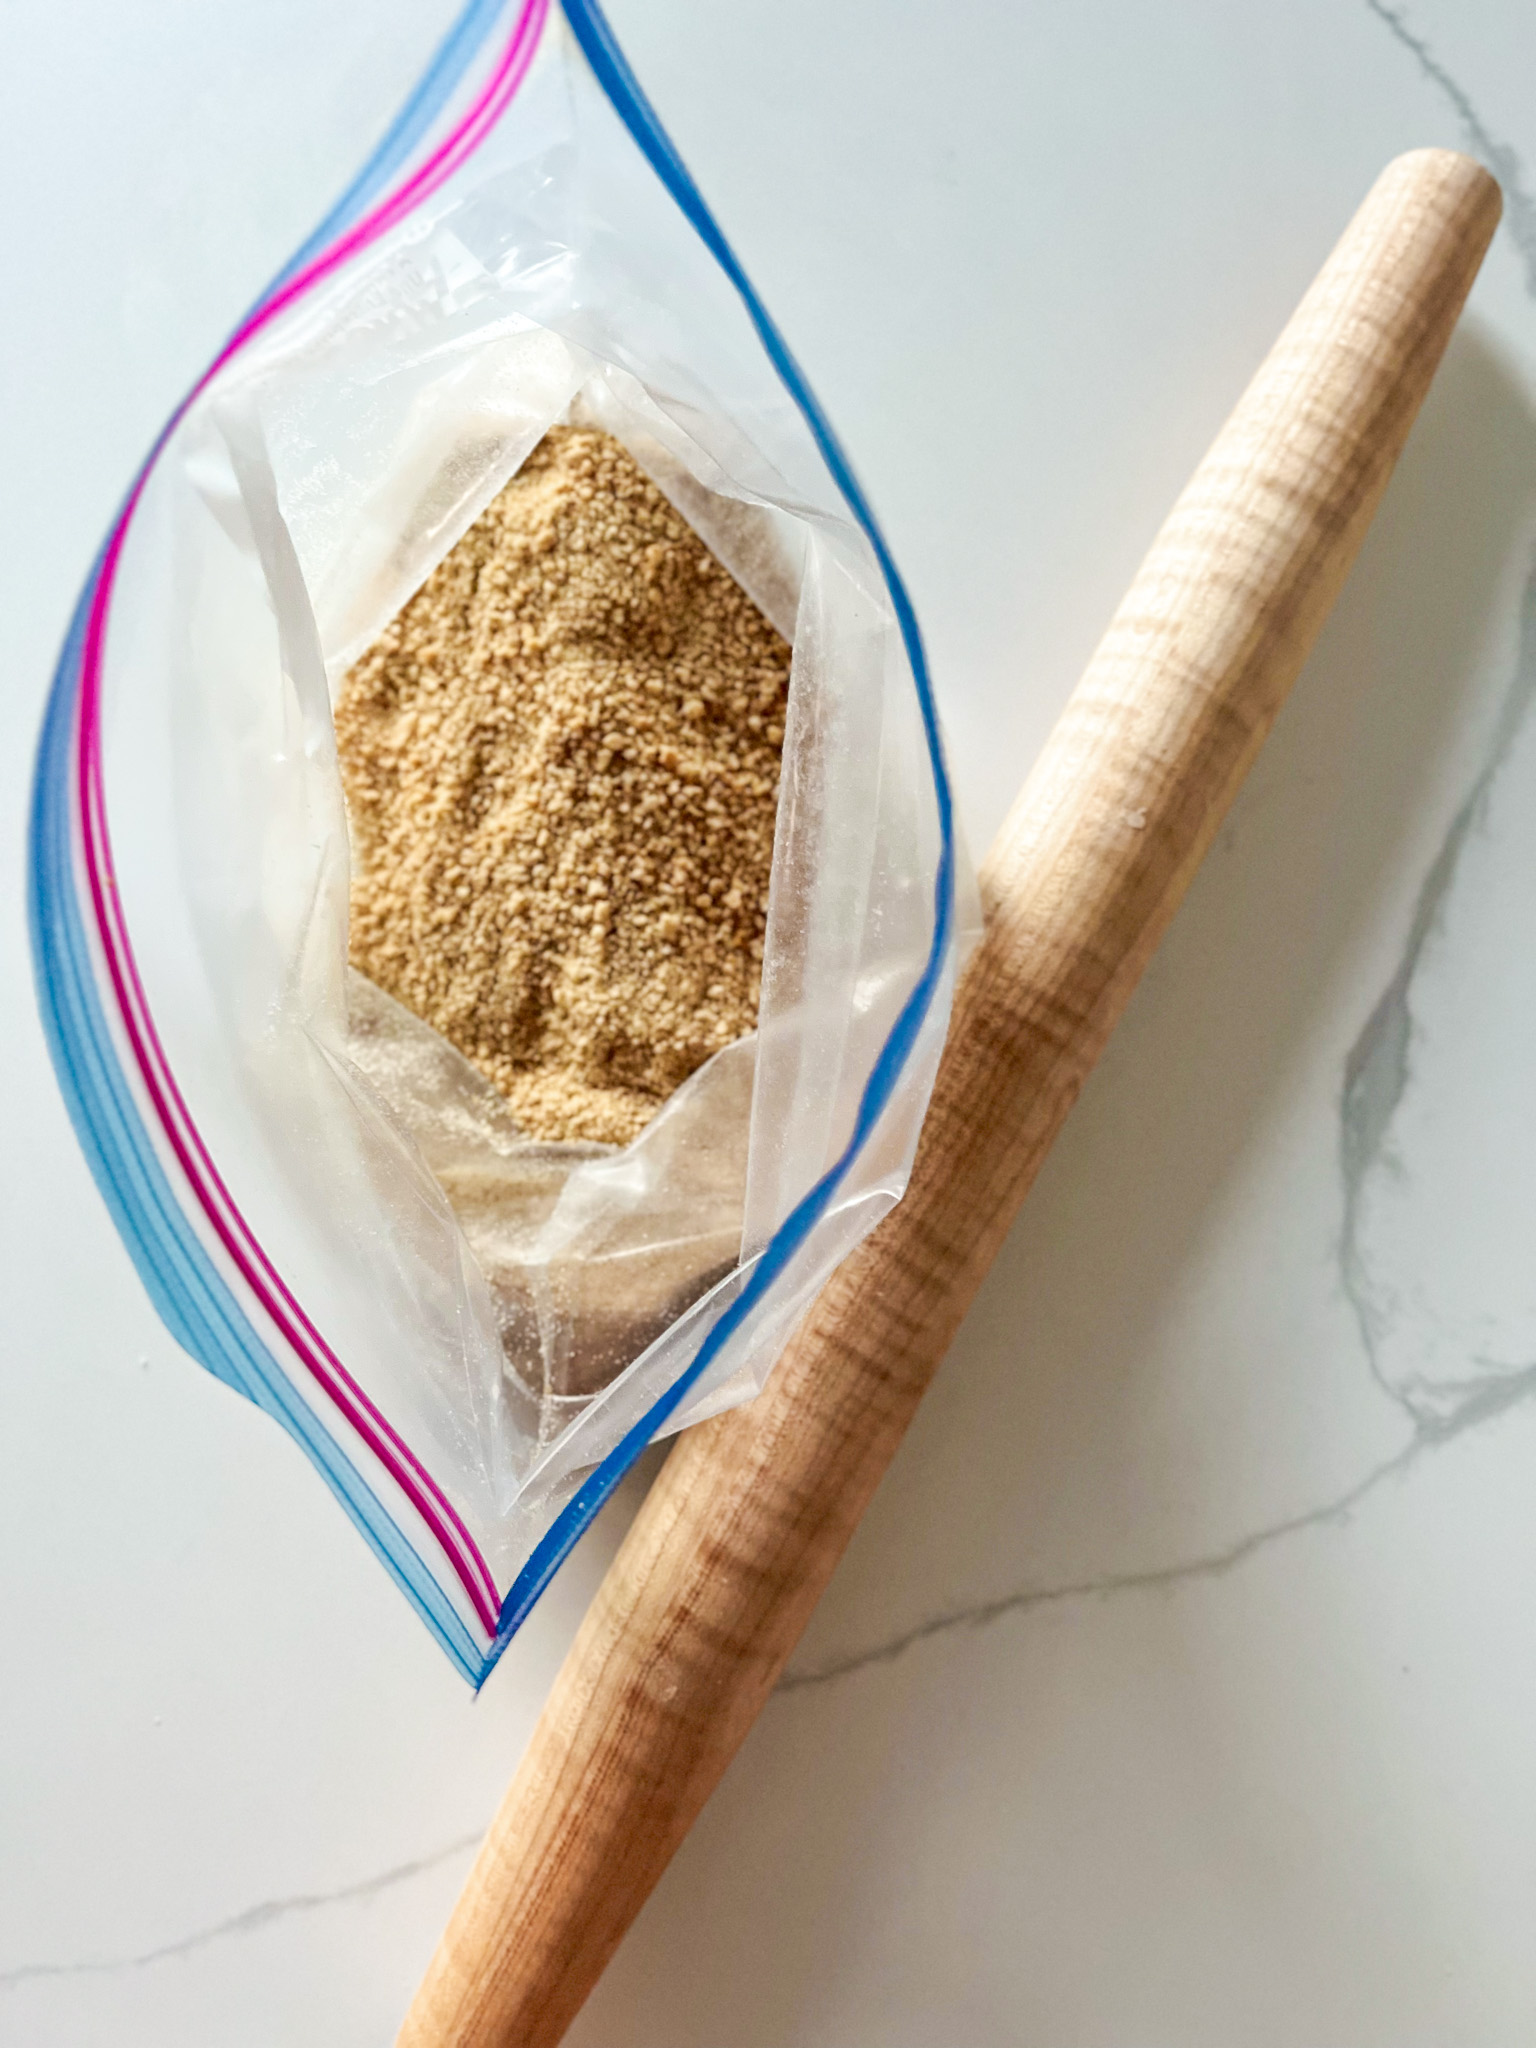 Graham Cracker crumbs in a bag for a Crust Recipe